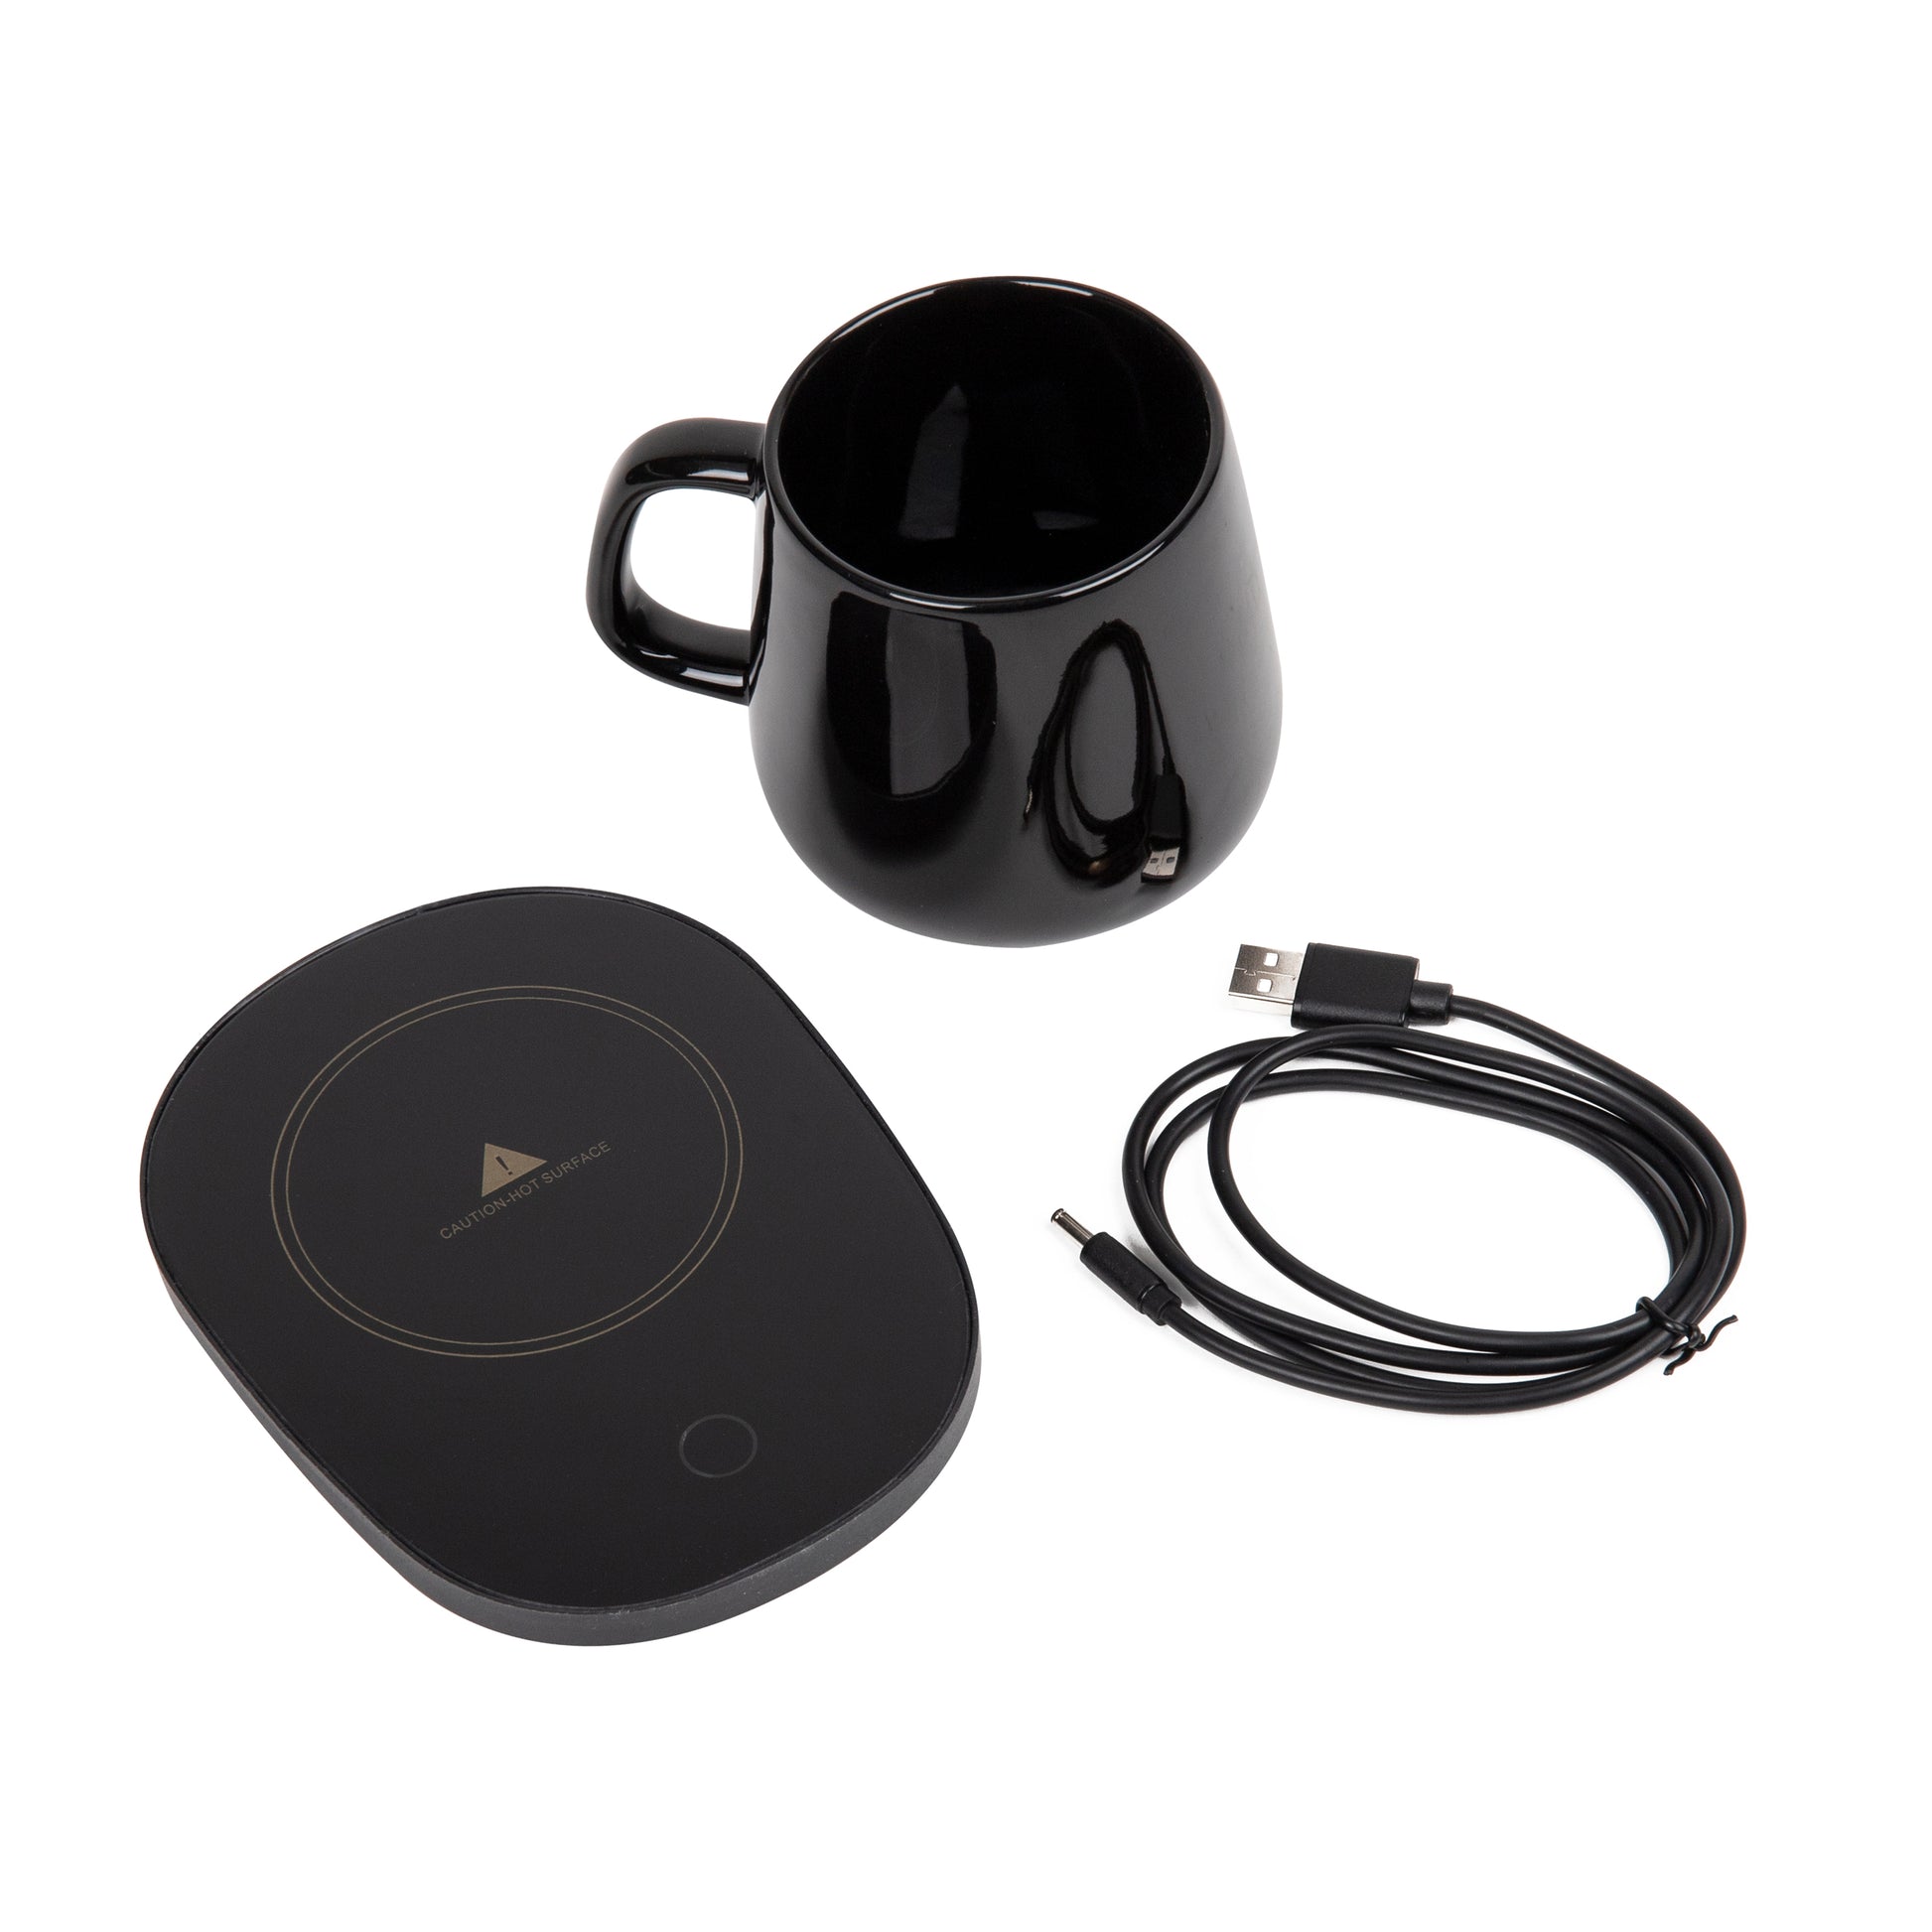 USB Cup Warmer Hot Plate vs USB Heated Mug Comparison and Review 